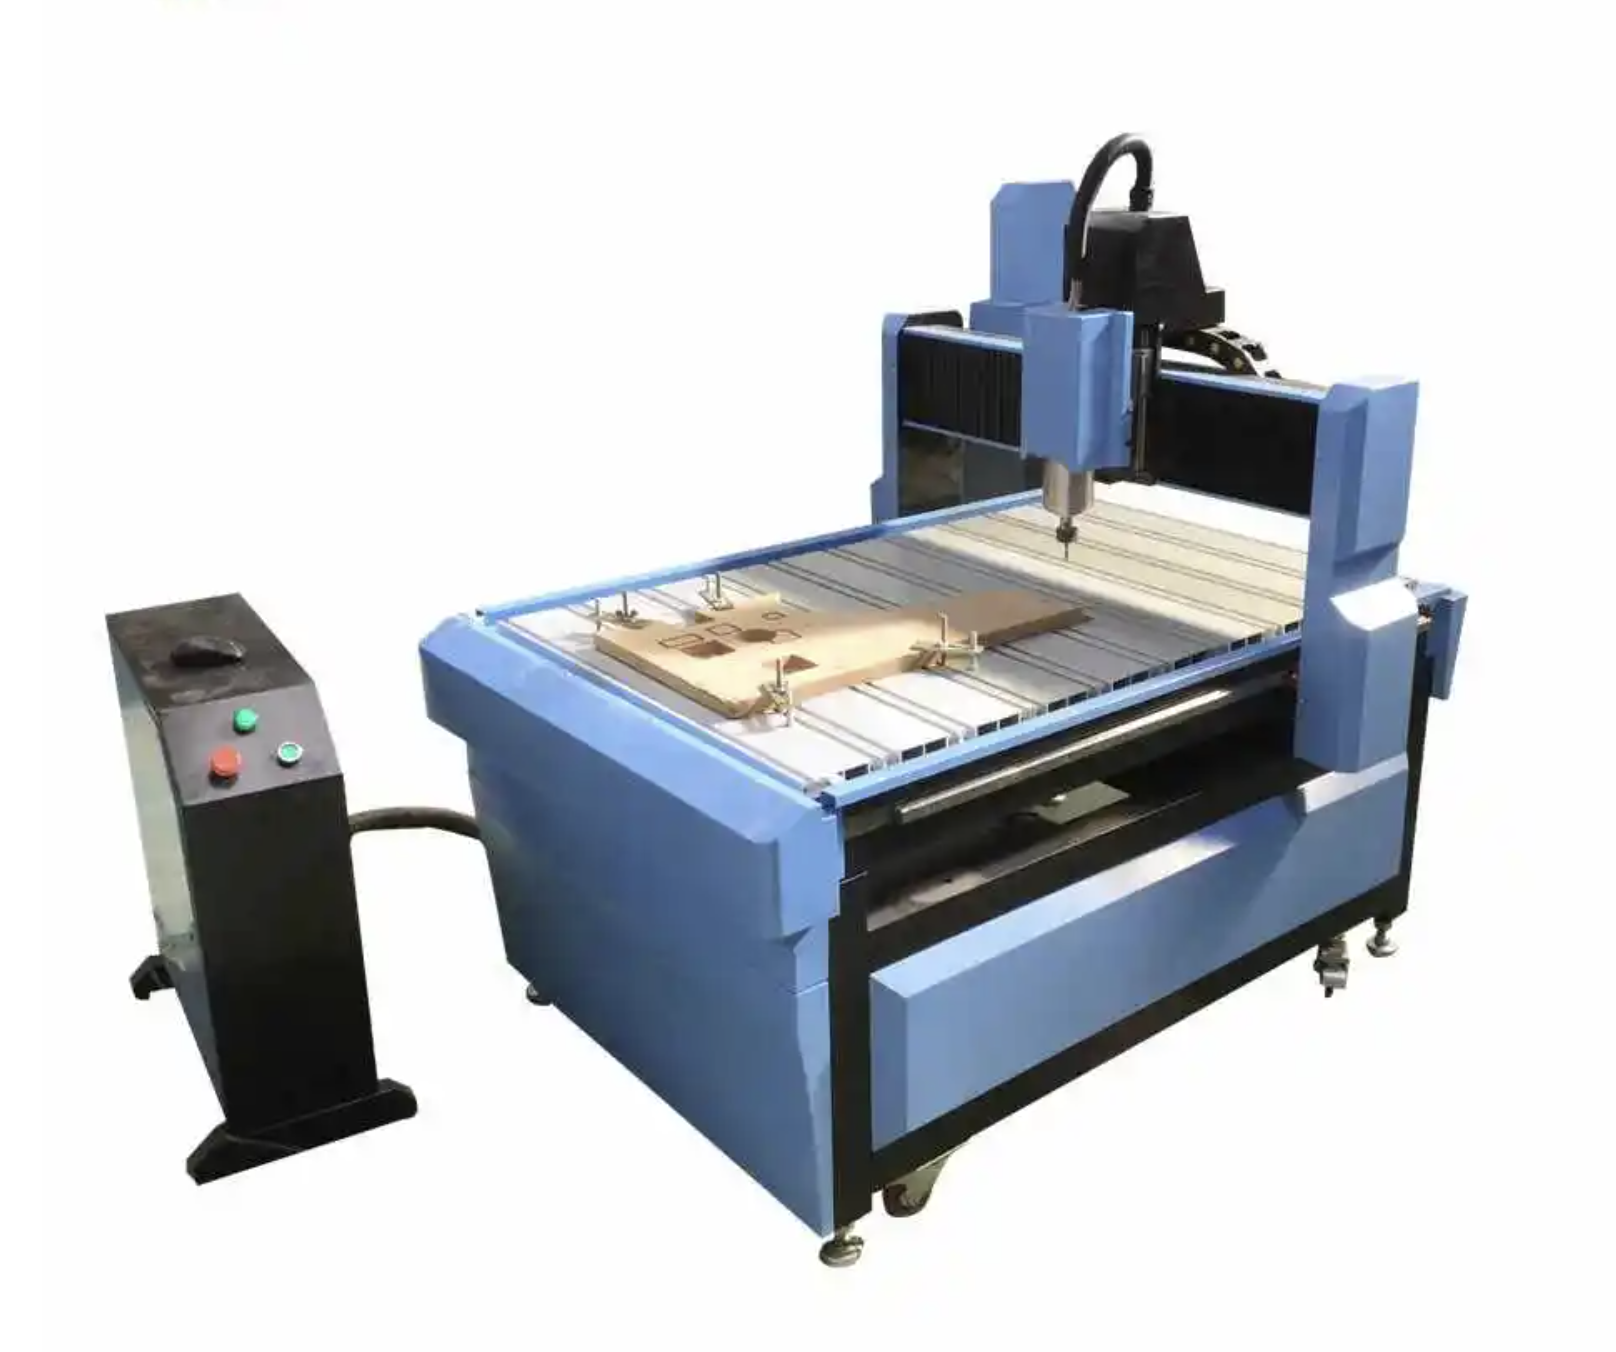 What is the cost of a CNC Router machine?